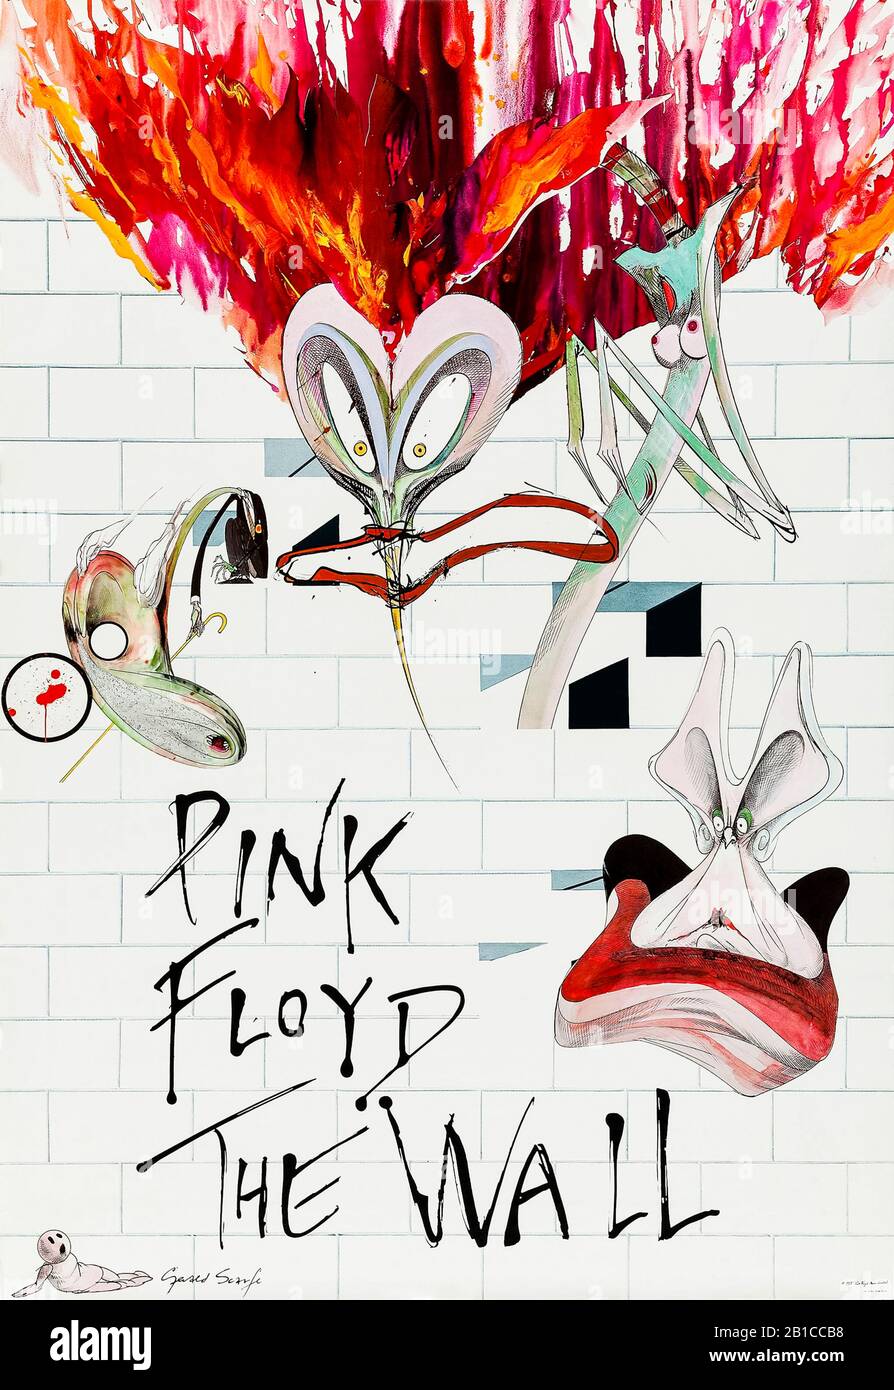 ‘The Wall’ 1979 album poster produced by Harvest Records to promote the 11th studio album by English rock band Pink Floyd featuring artwork by Gerald Scarfe. Stock Photo